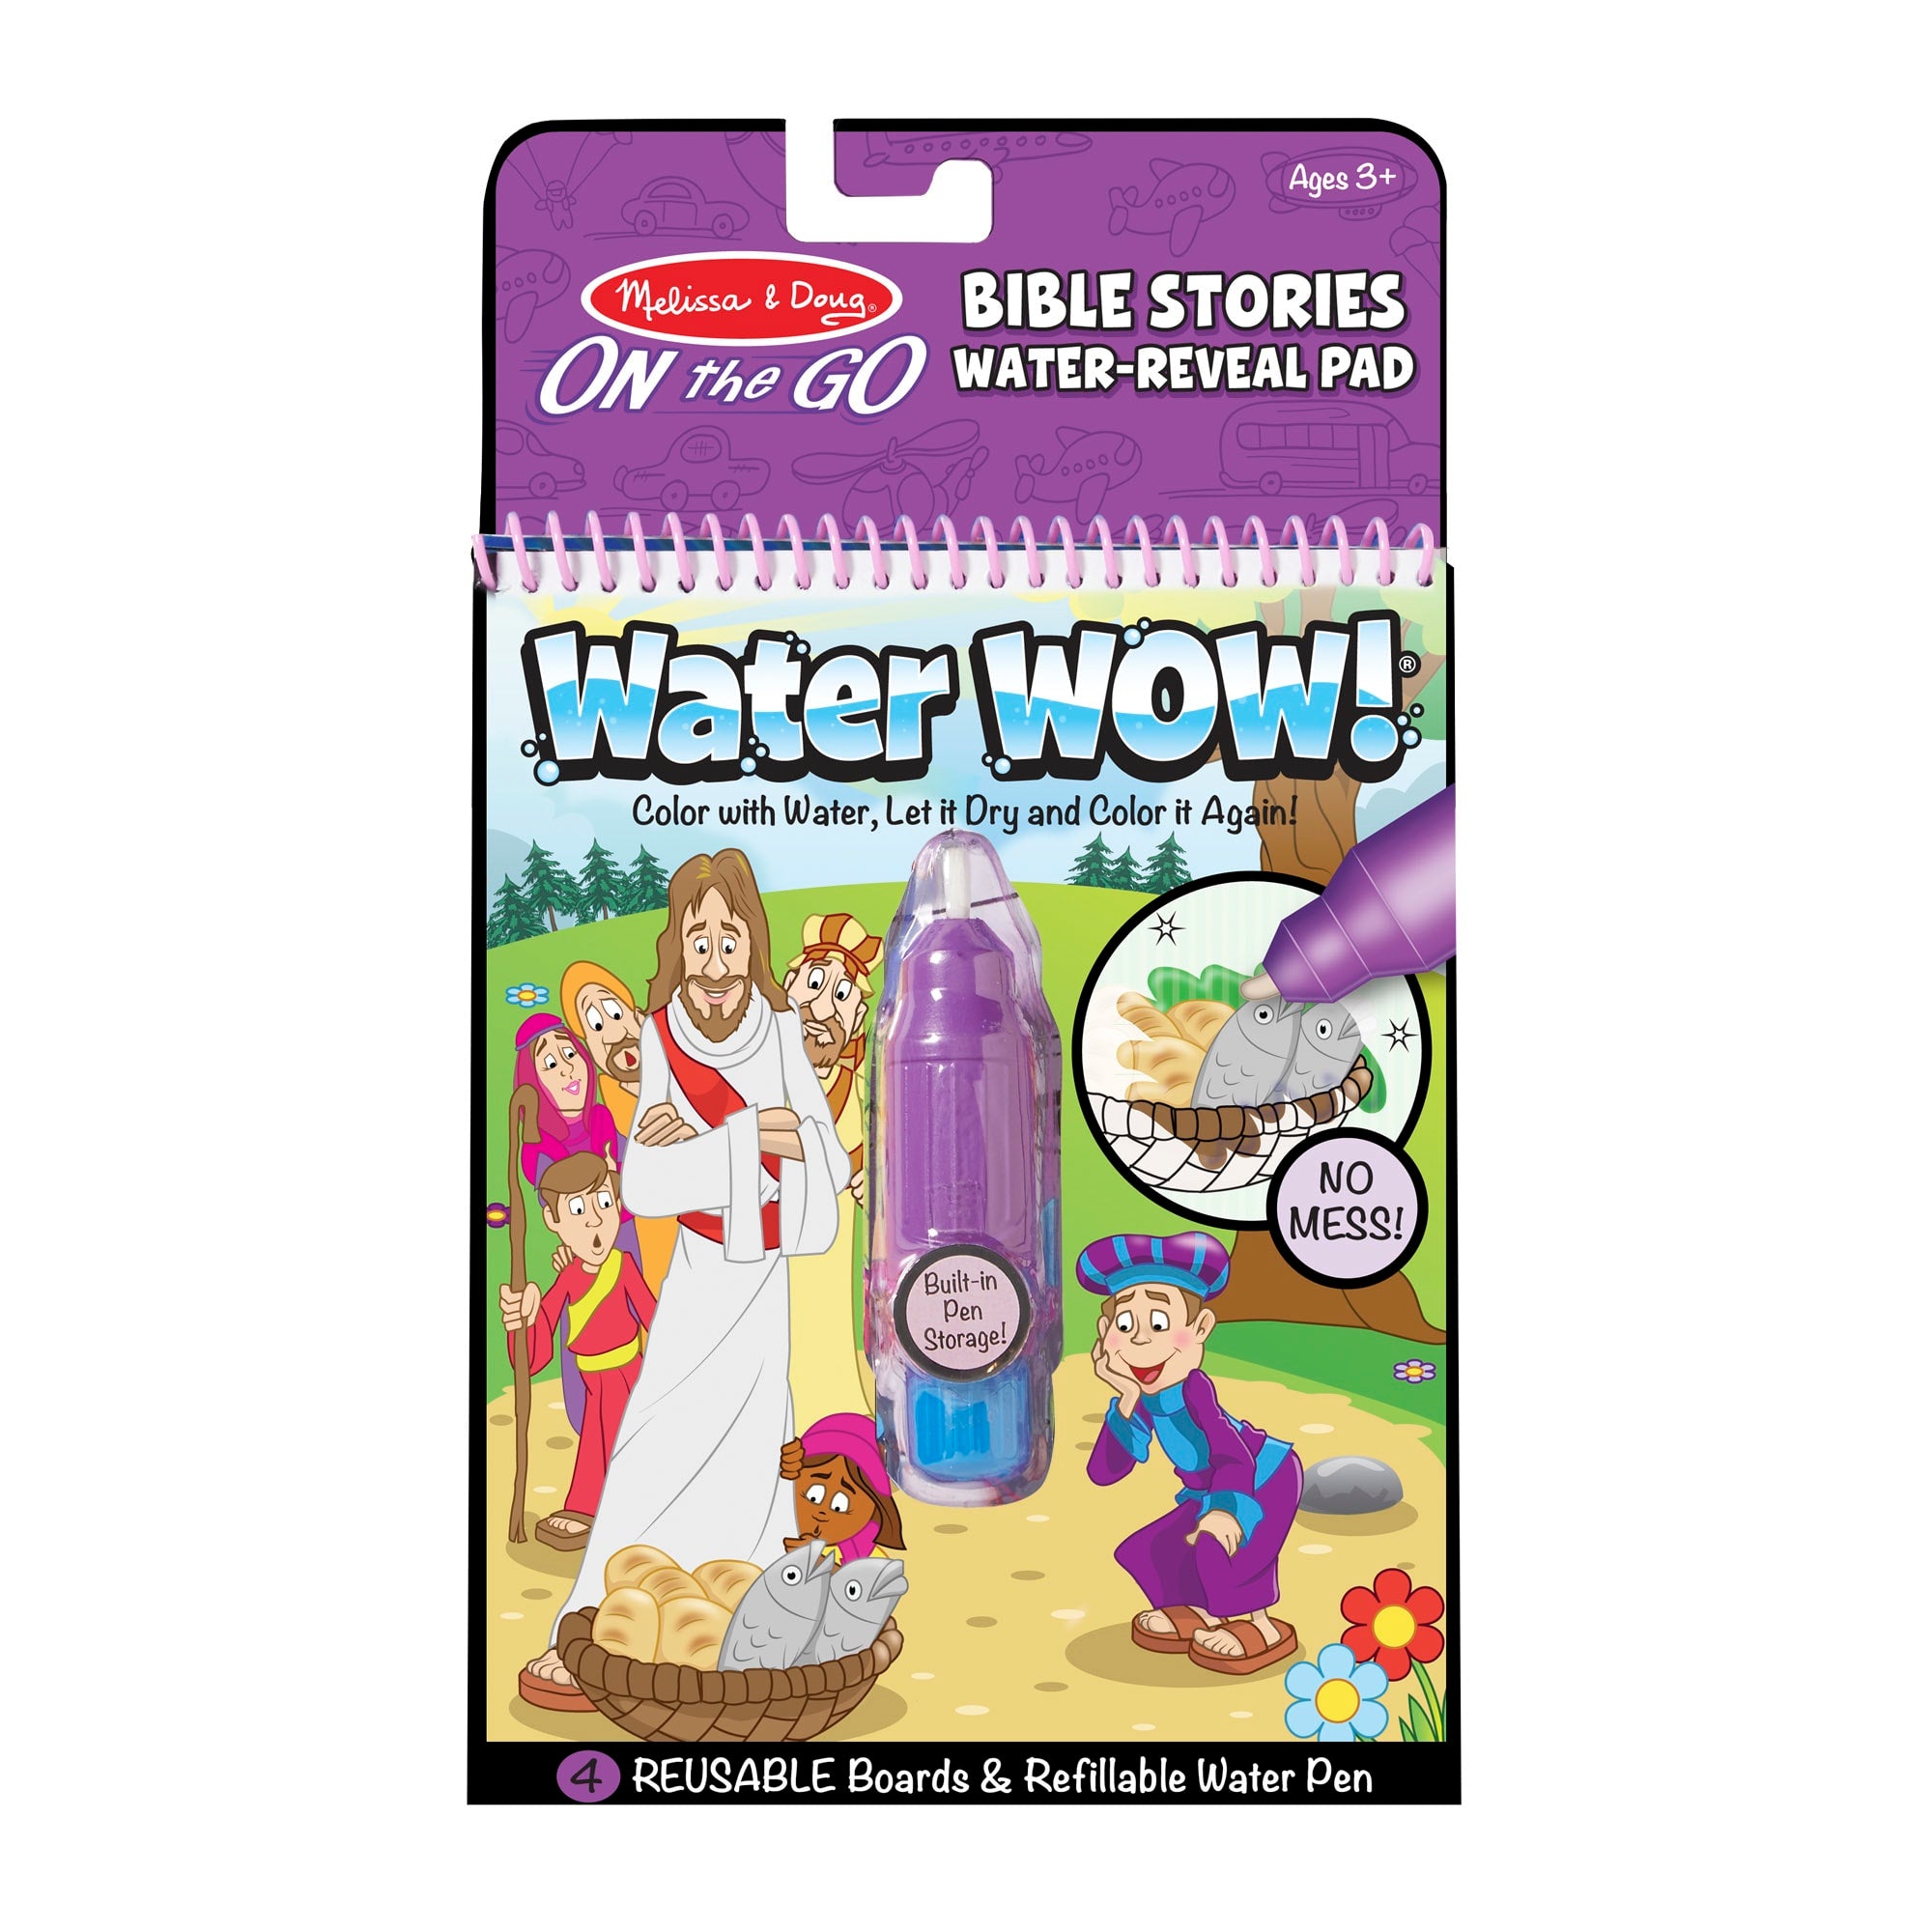 Melissa & Doug Water Wow! On The Go Water-Reveal Pad / Bible Stories